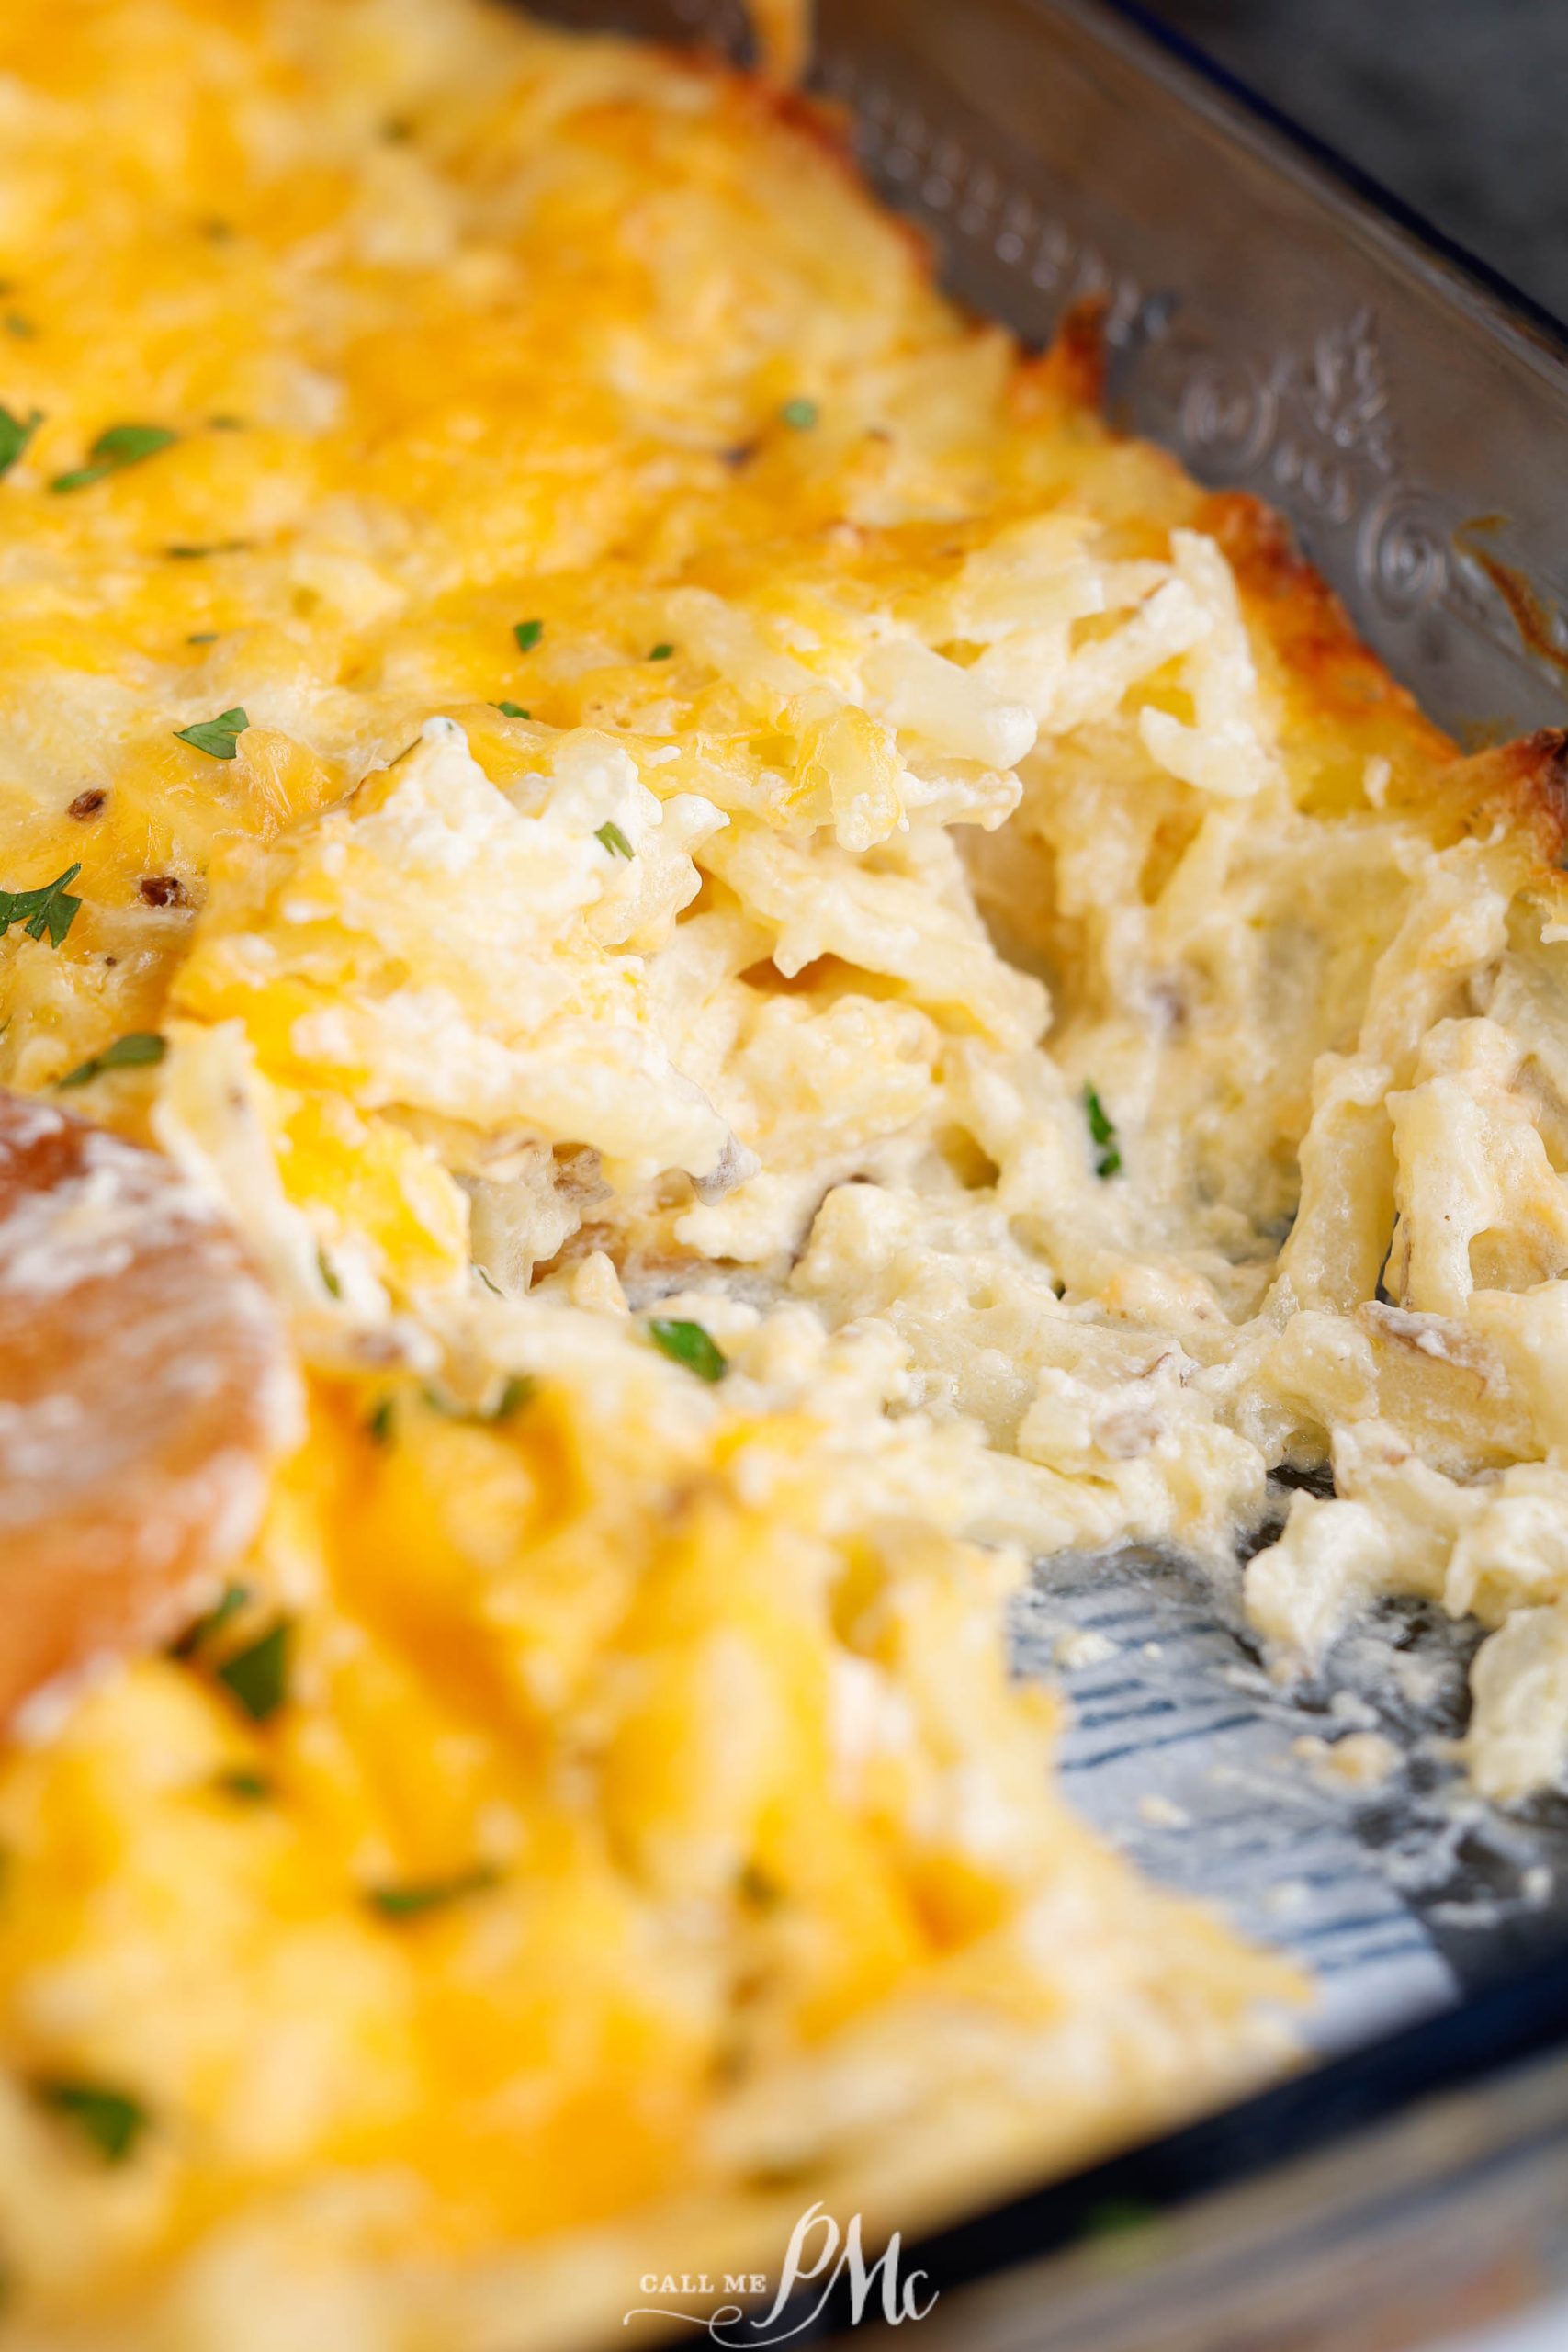 Cheesy hashbrown casserole in a pan.